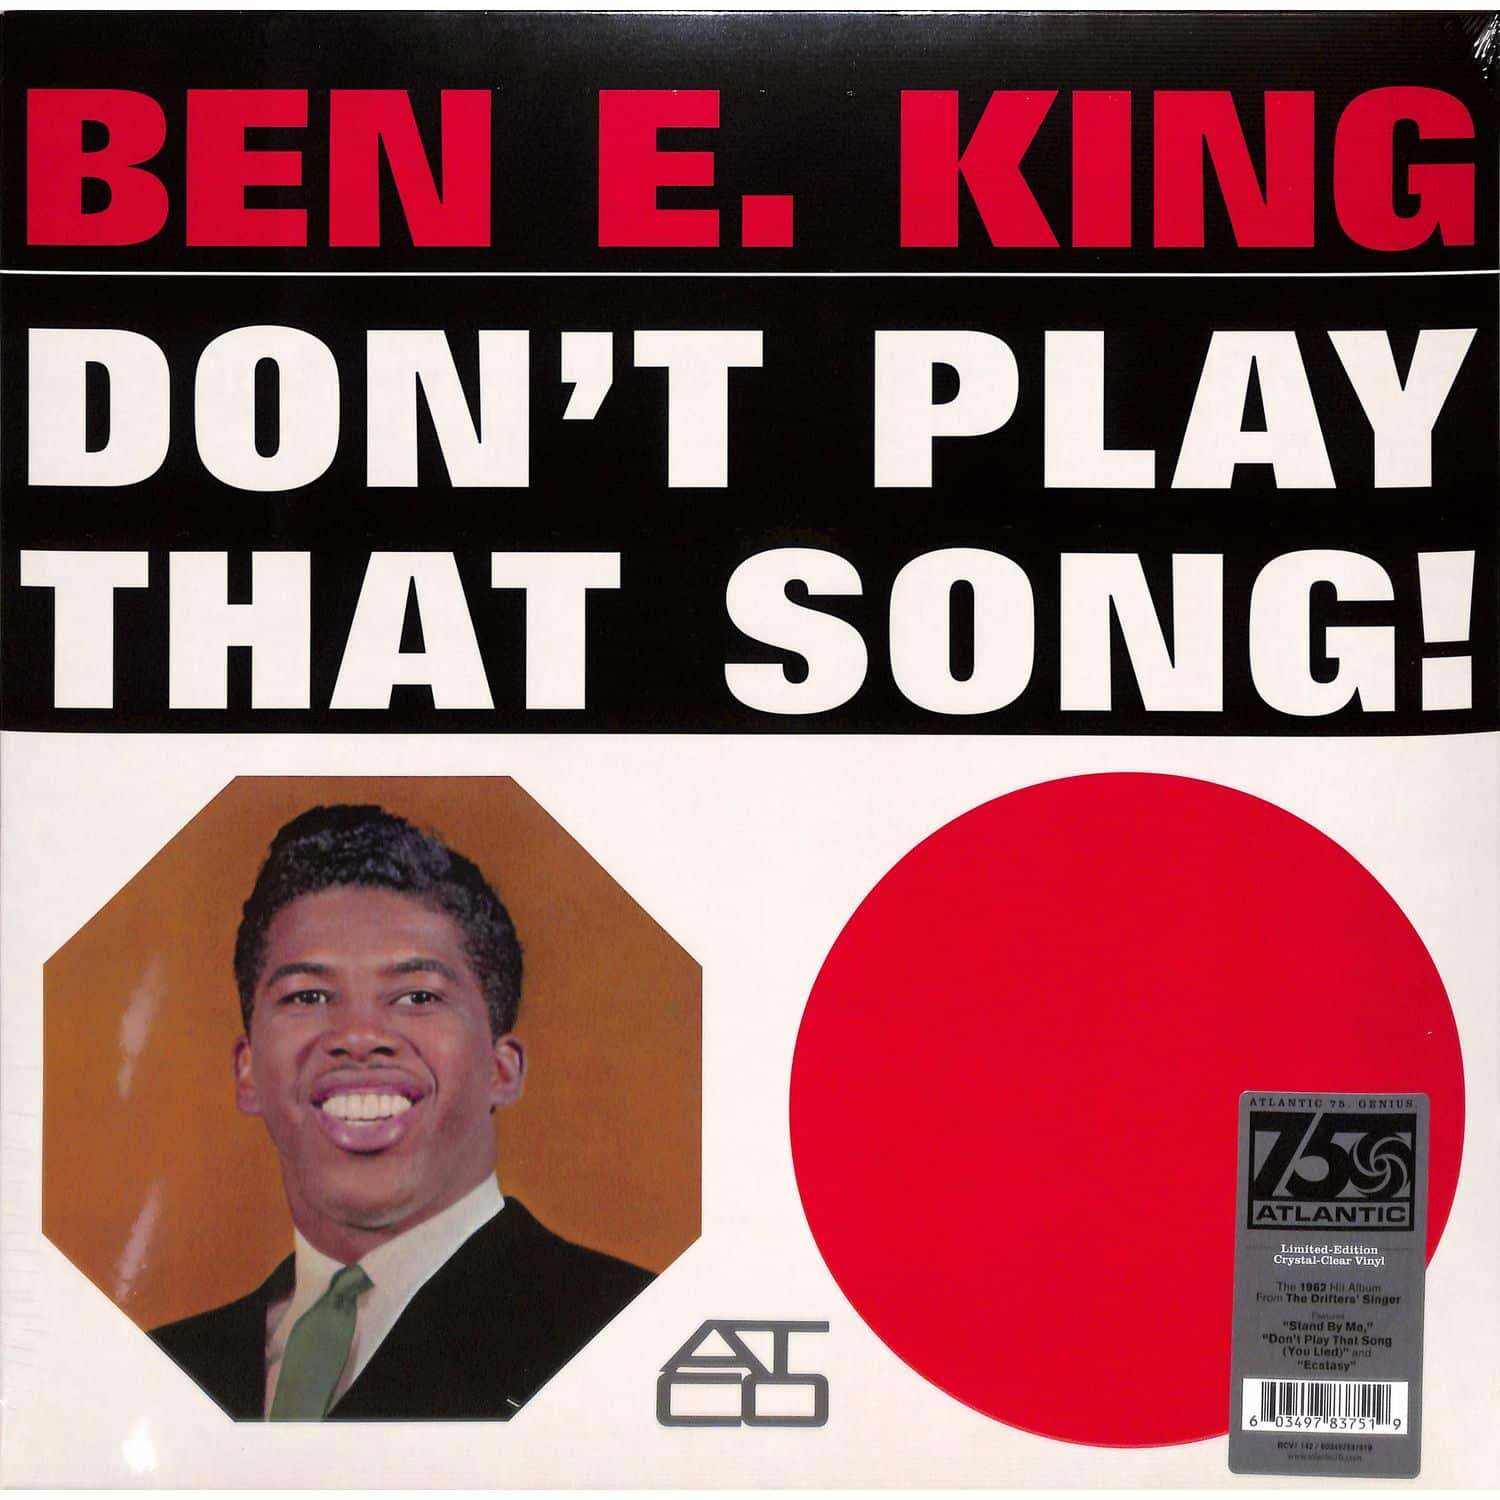 Ben E. King - DONT PLAY THAT SONG! 